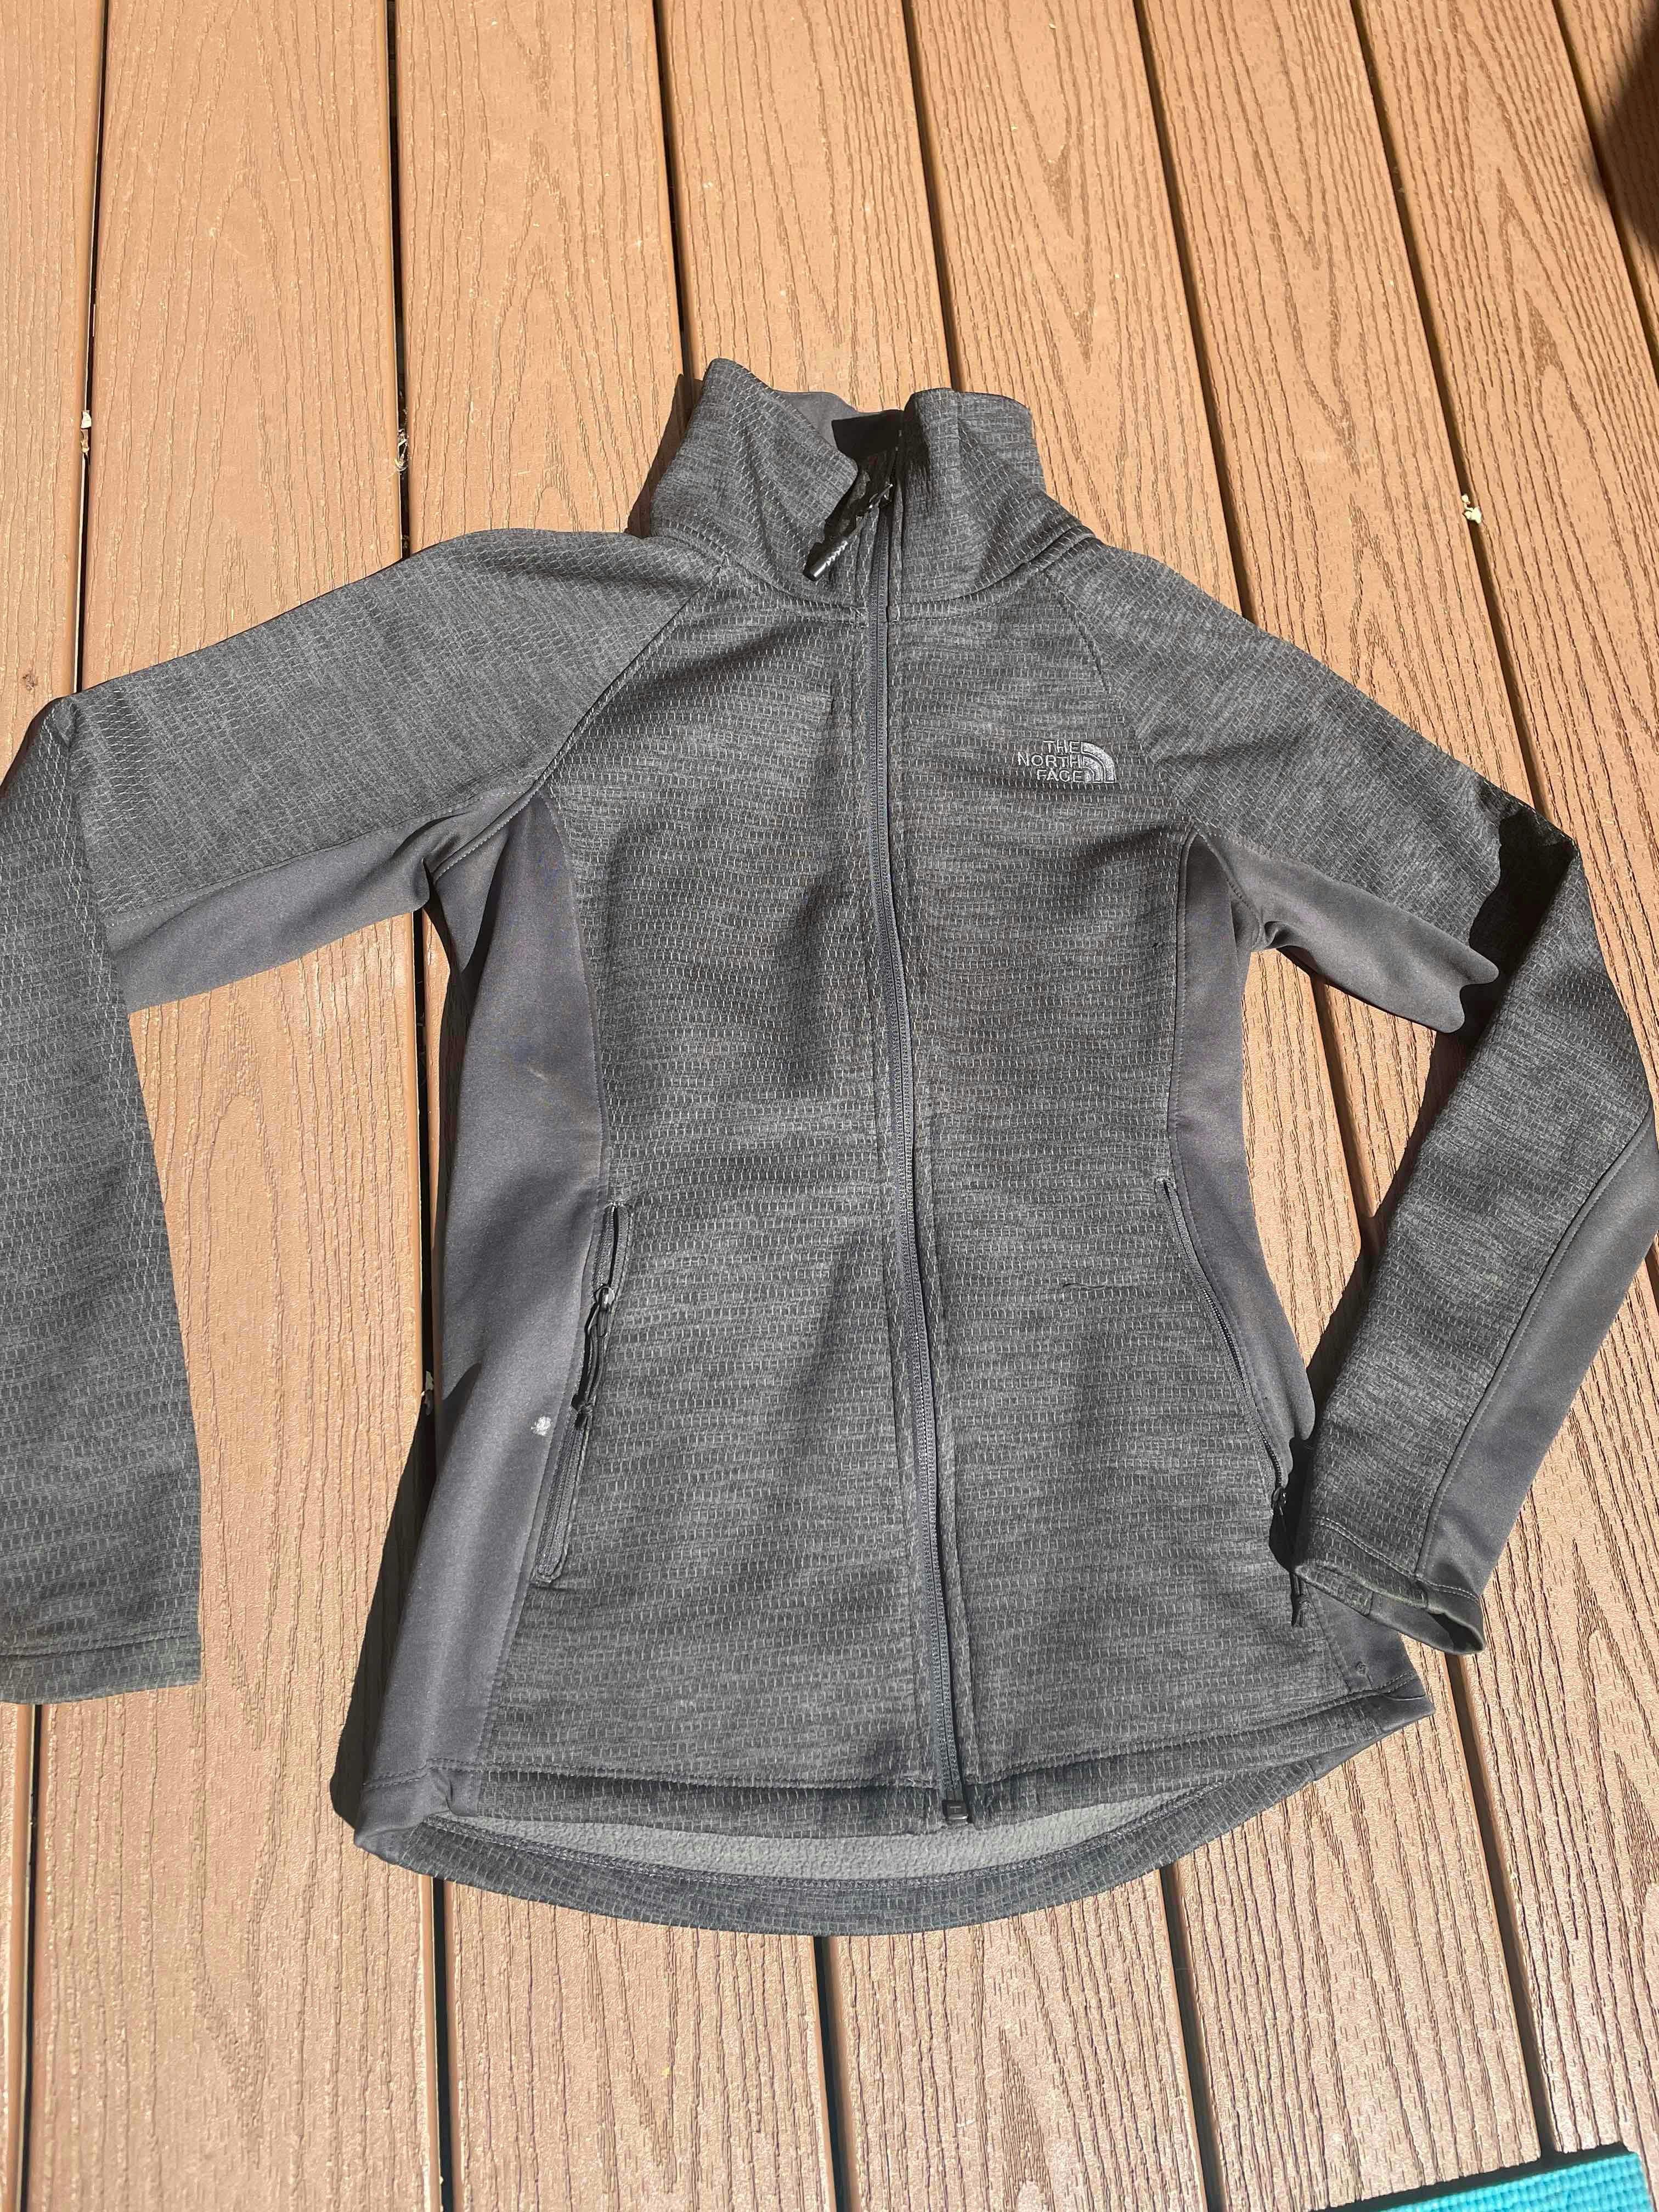  The North Face Jacket - Womens XS